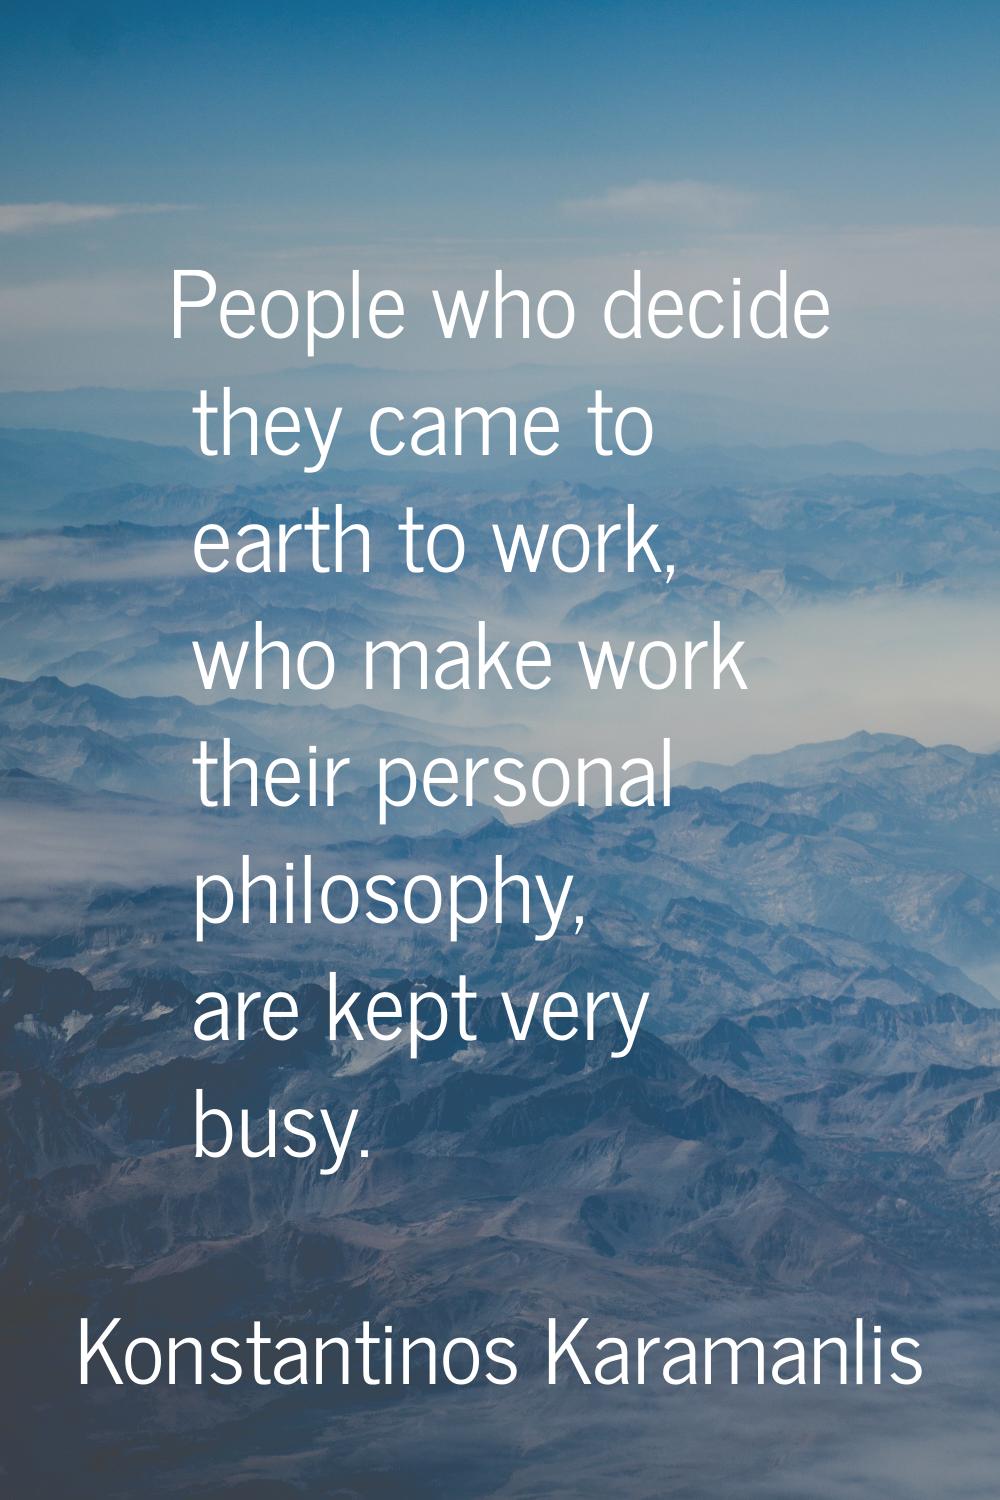 People who decide they came to earth to work, who make work their personal philosophy, are kept ver